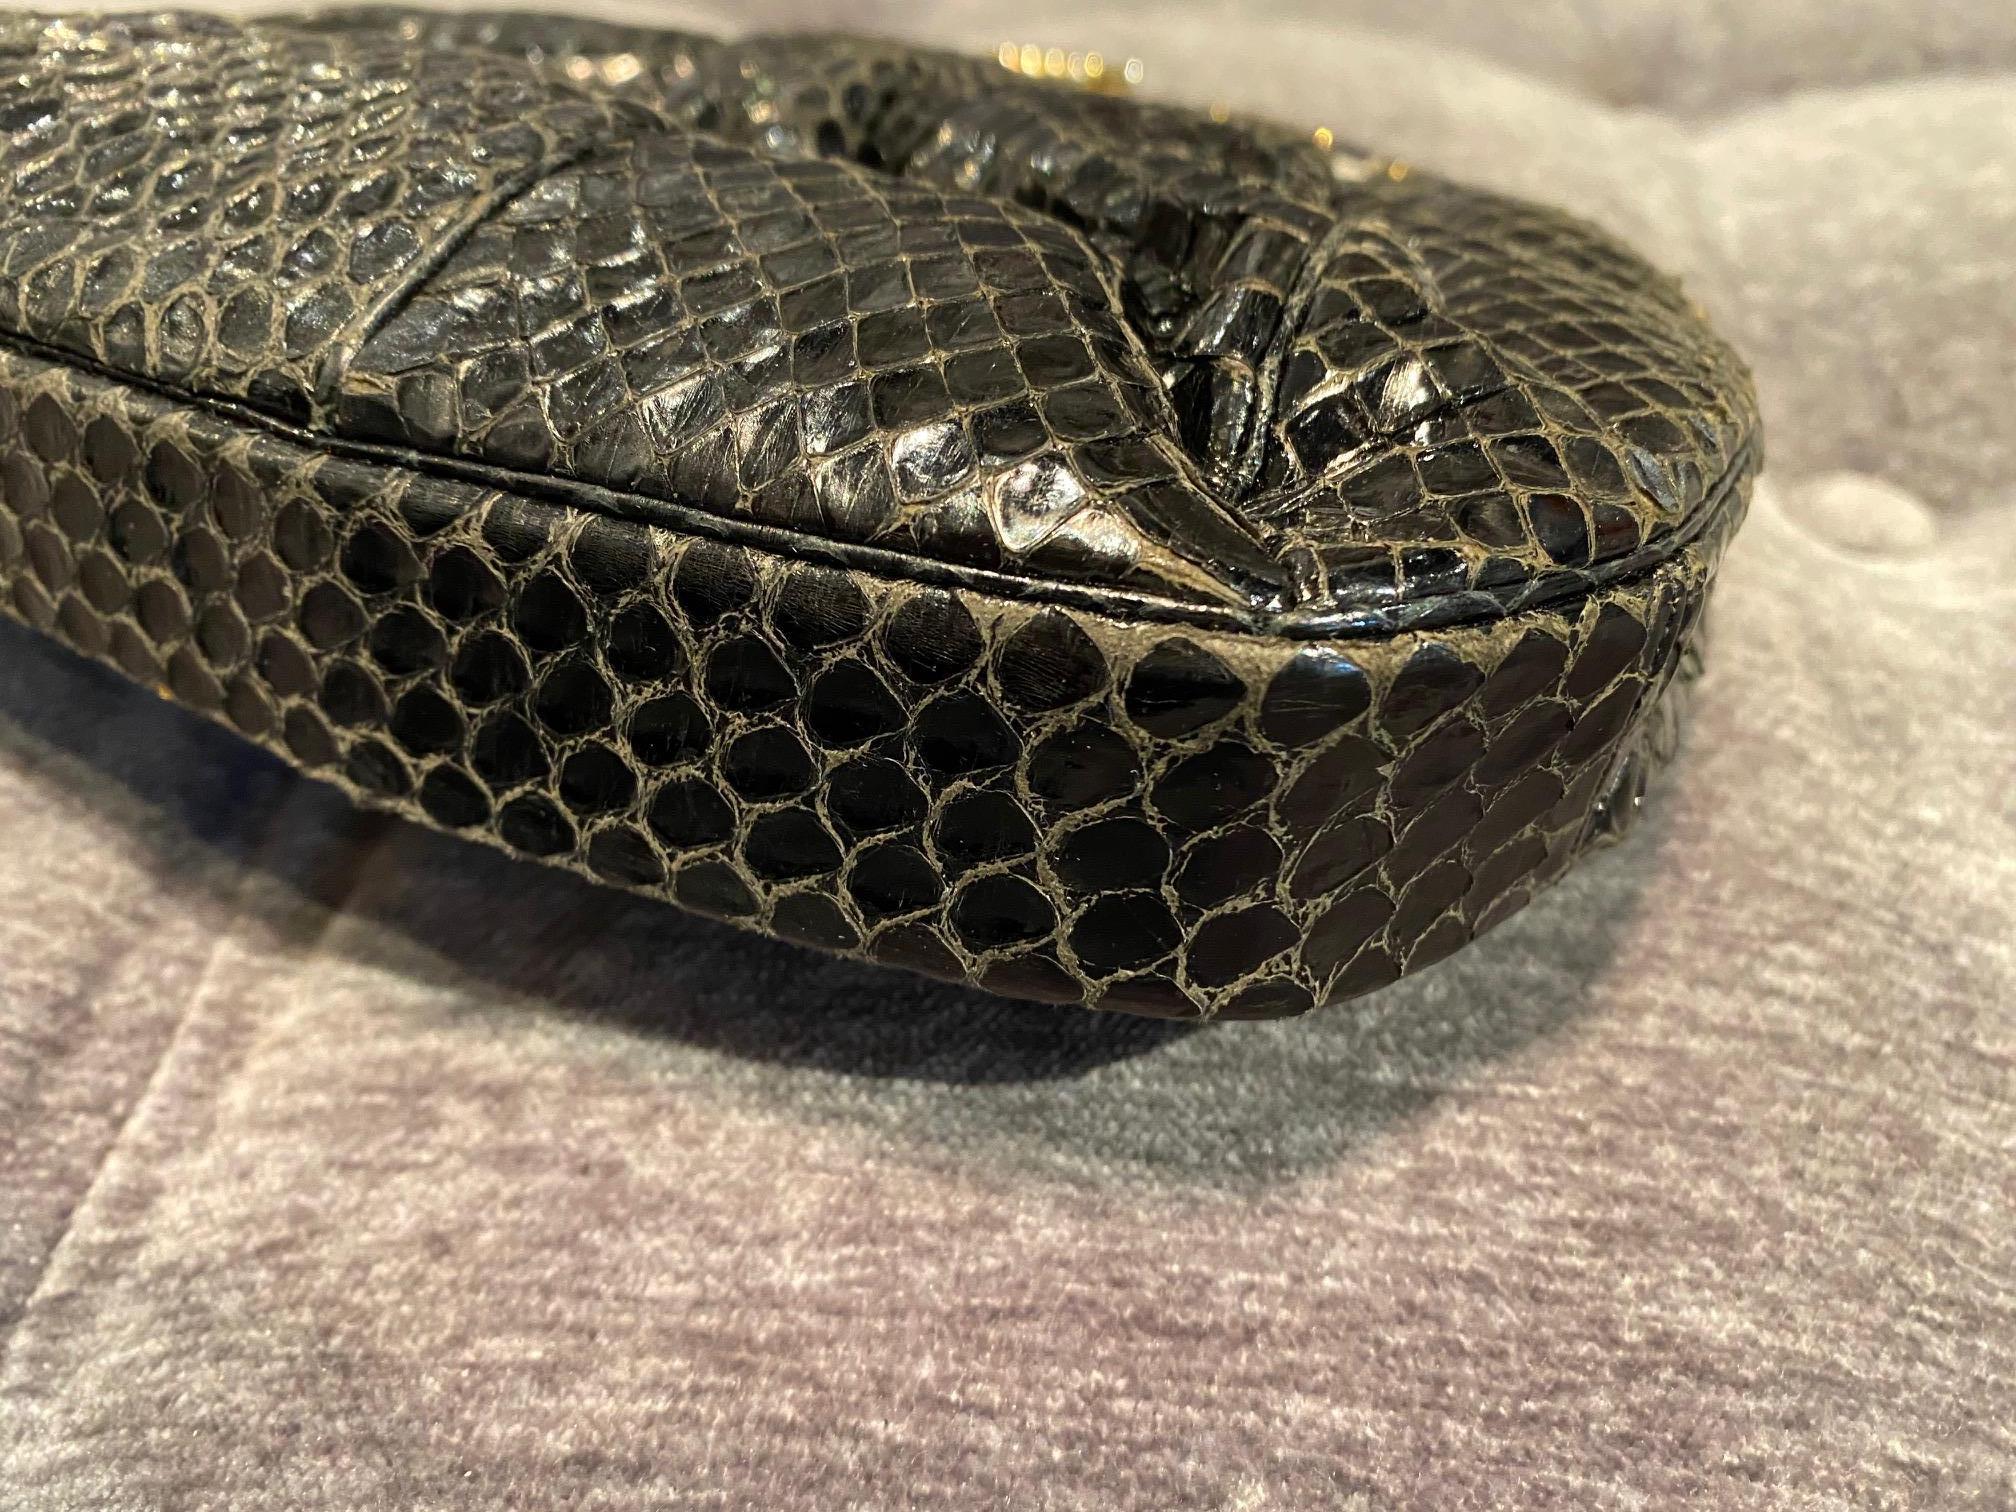 Judith Leiber Karung Embellished Clutch In Fair Condition For Sale In Roslyn, NY